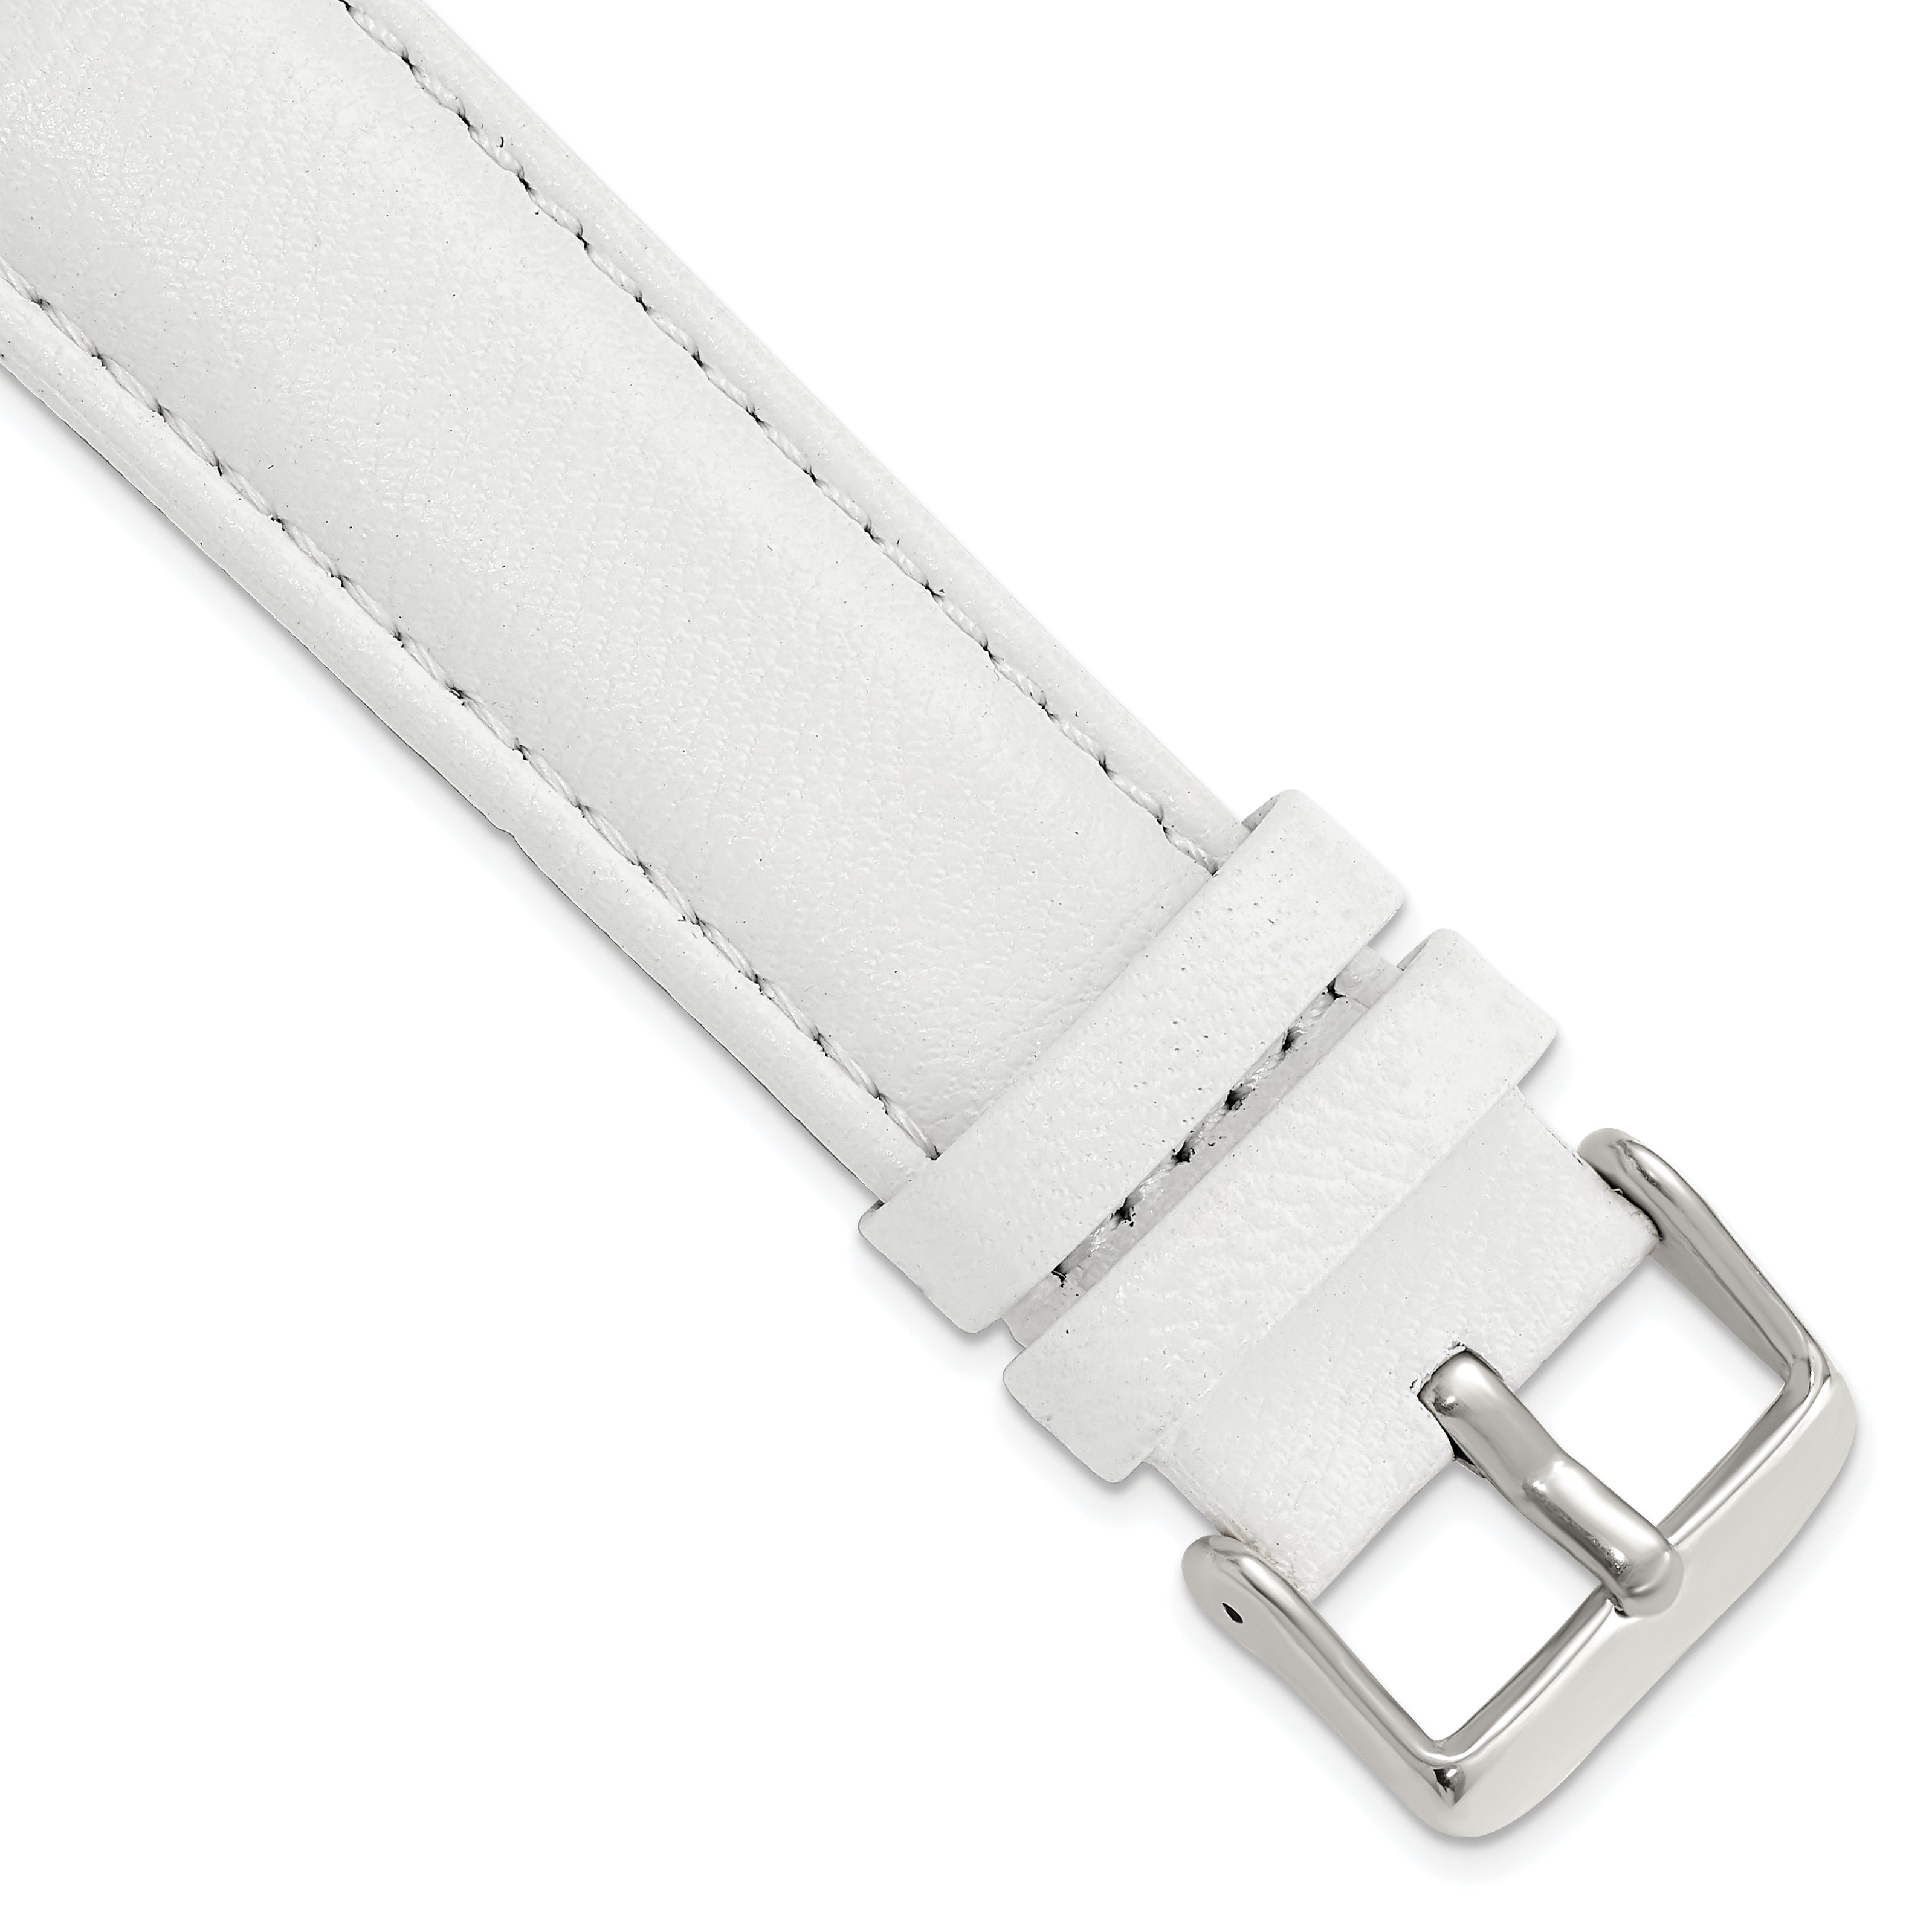 DeBeer 22mm White Glove Leather with Silver-tone Panerai Style Buckle 7.75 inch Watch Band